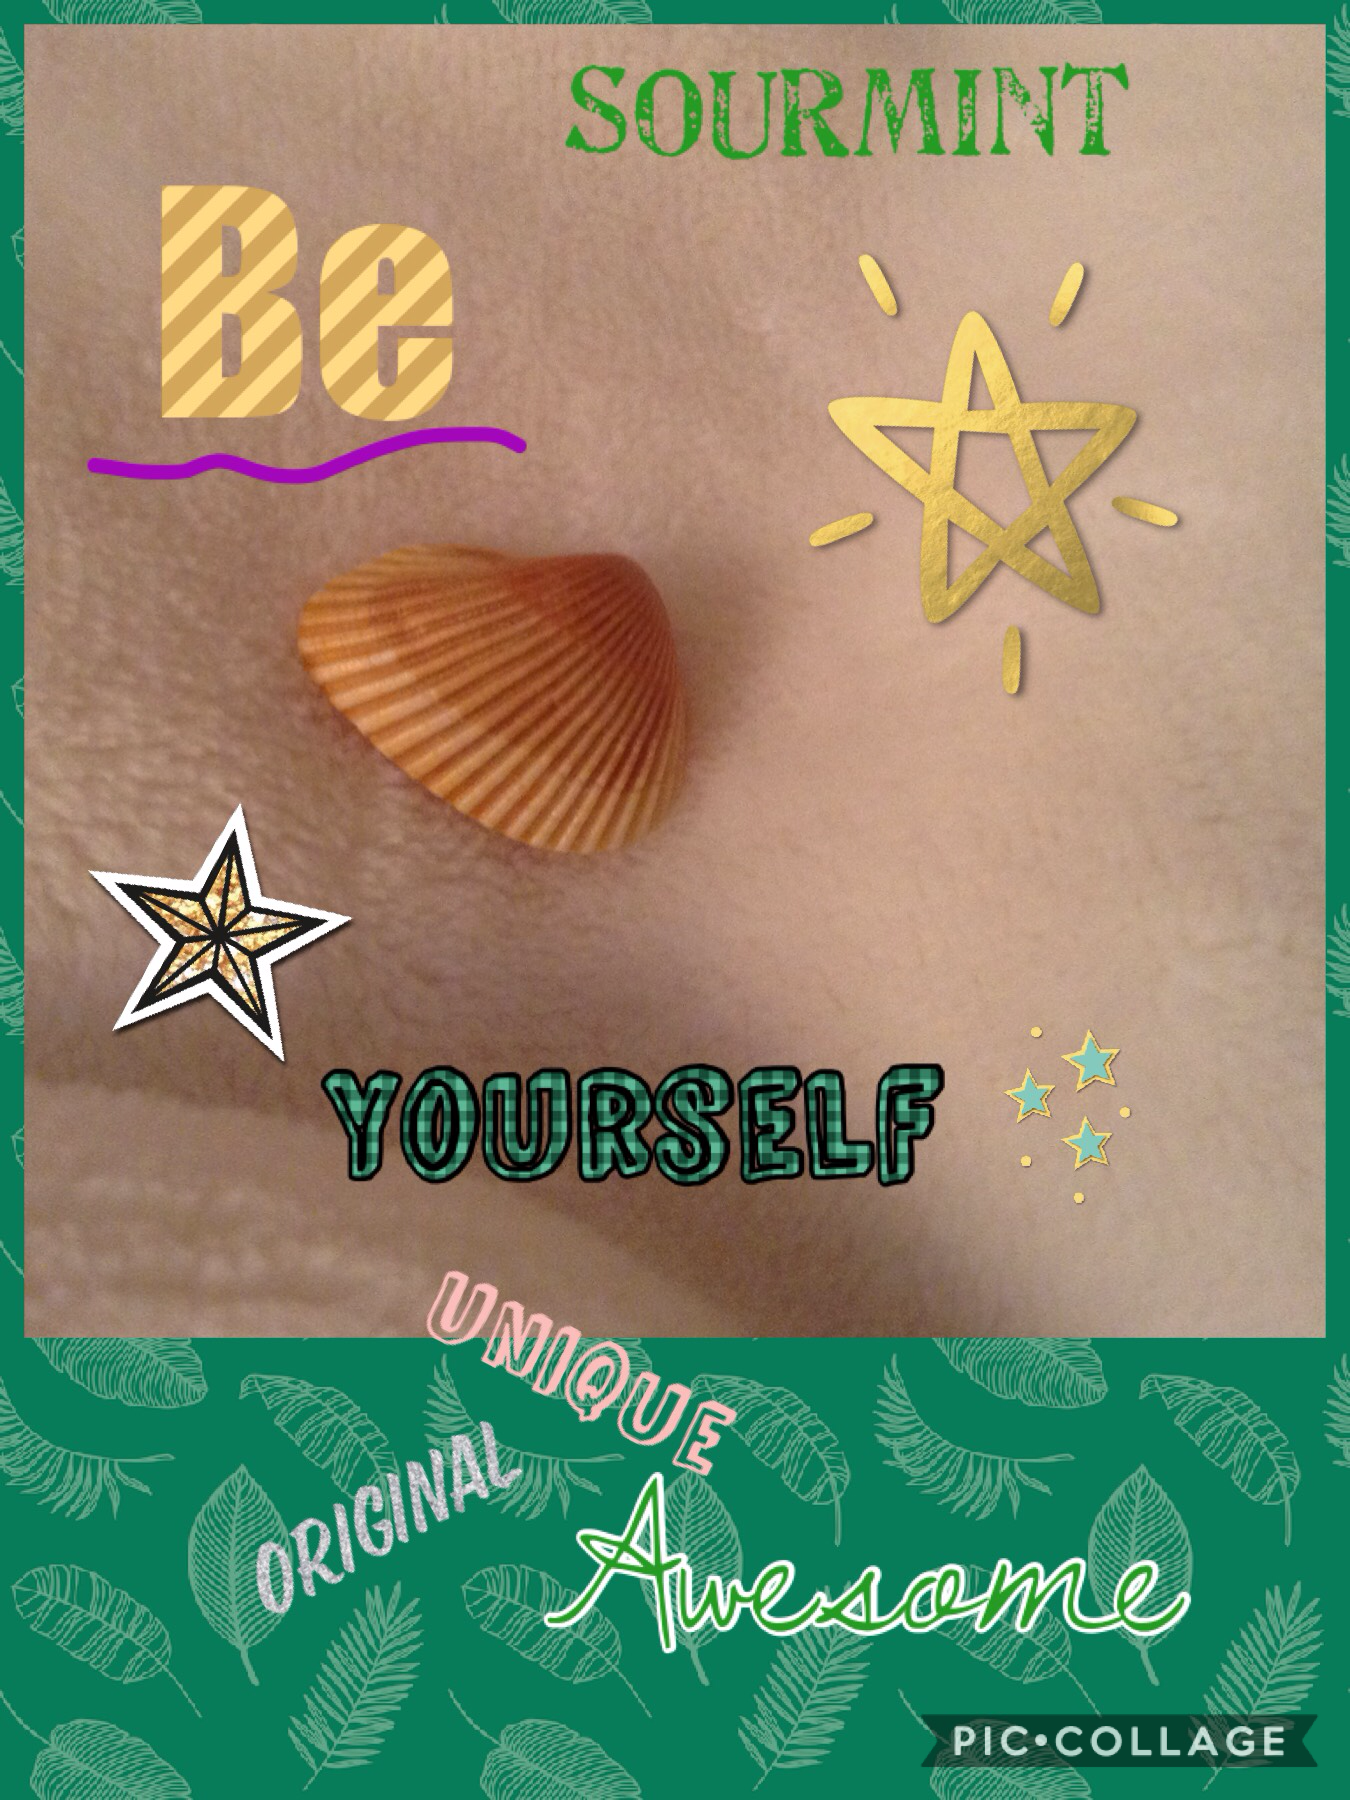 Thanks for reading this collage! Remember to be yourself!!!!